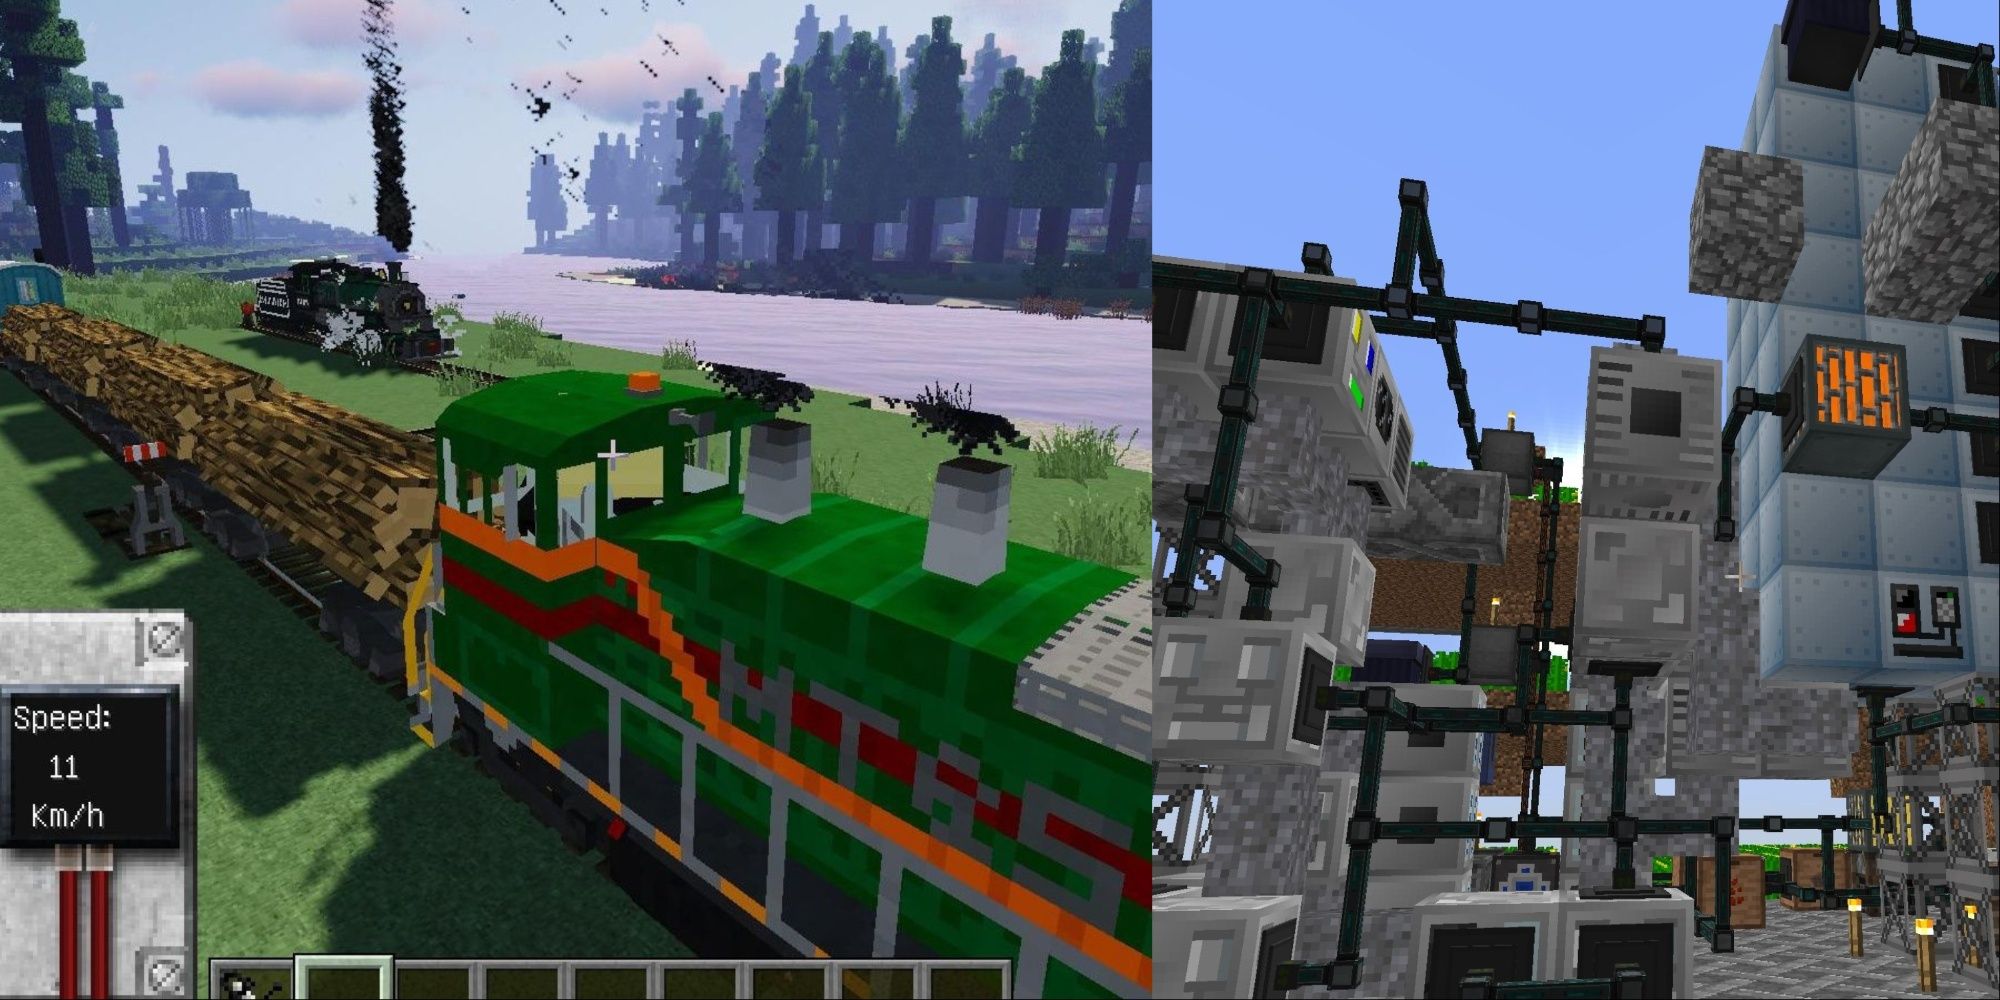 5 best mods for The End in Minecraft